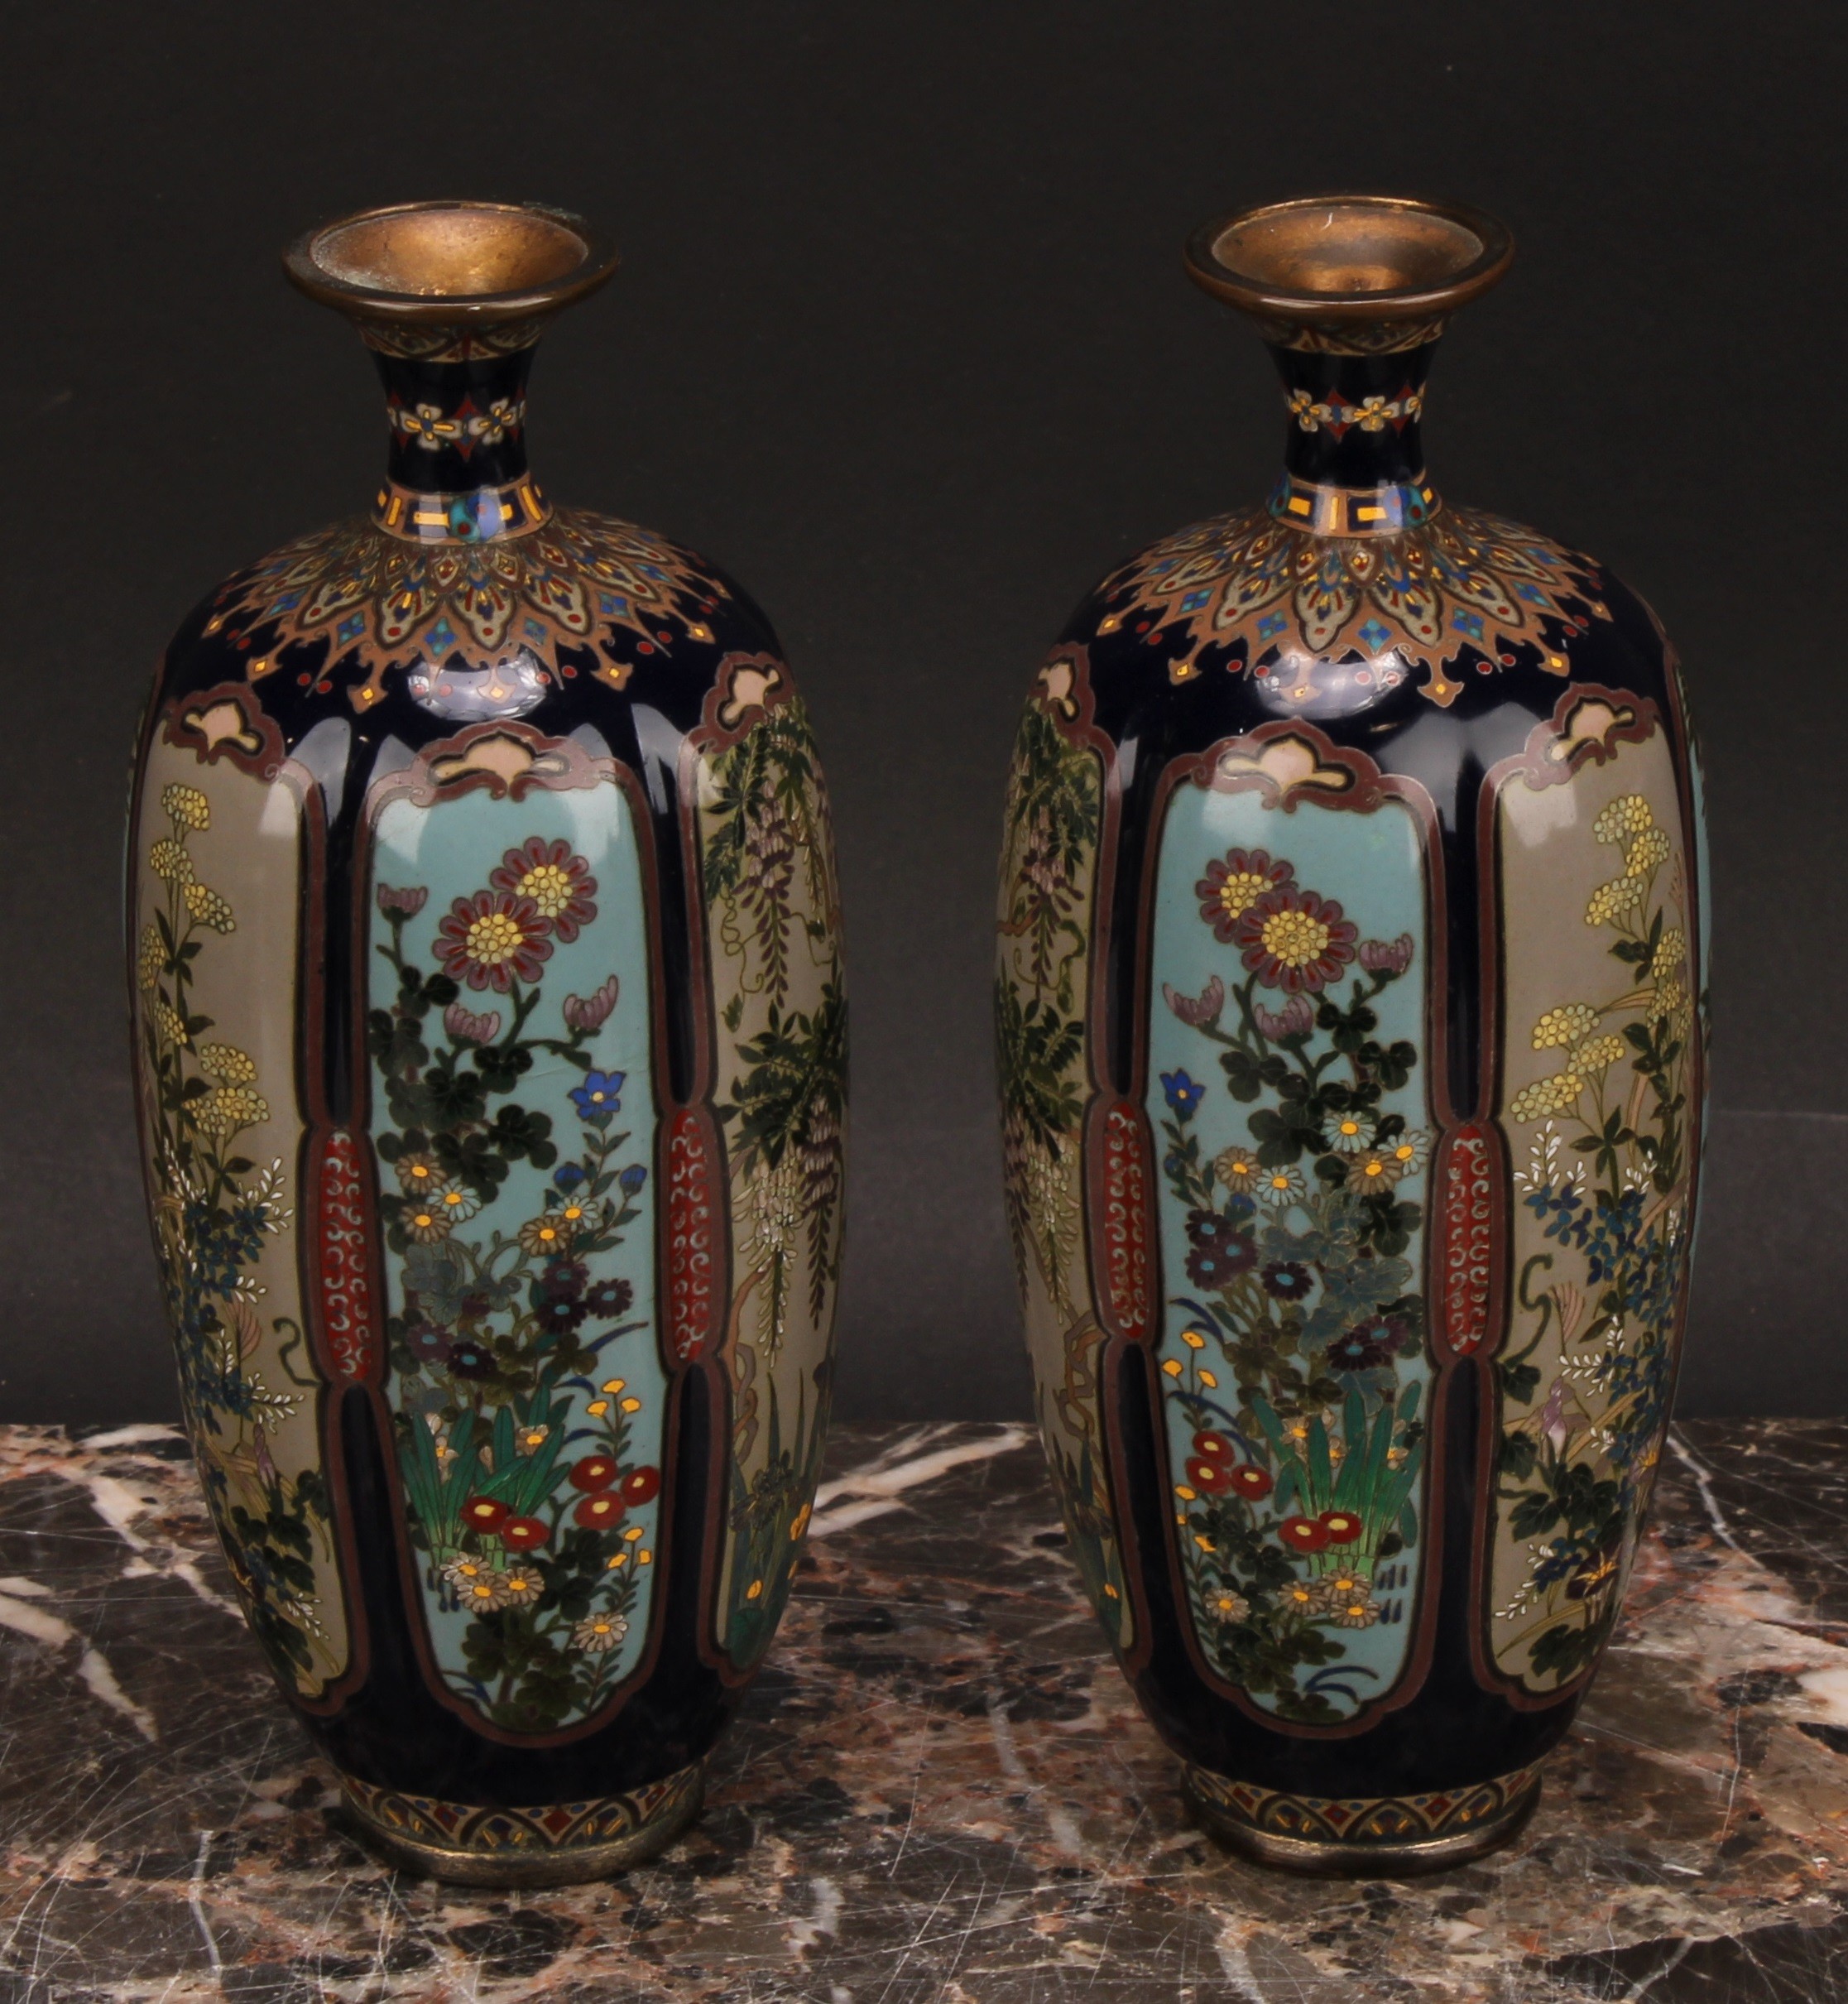 A pair of Japanese cloisonne enamel lobed ovoid vases, painted in polychrome with flowers within - Image 2 of 6